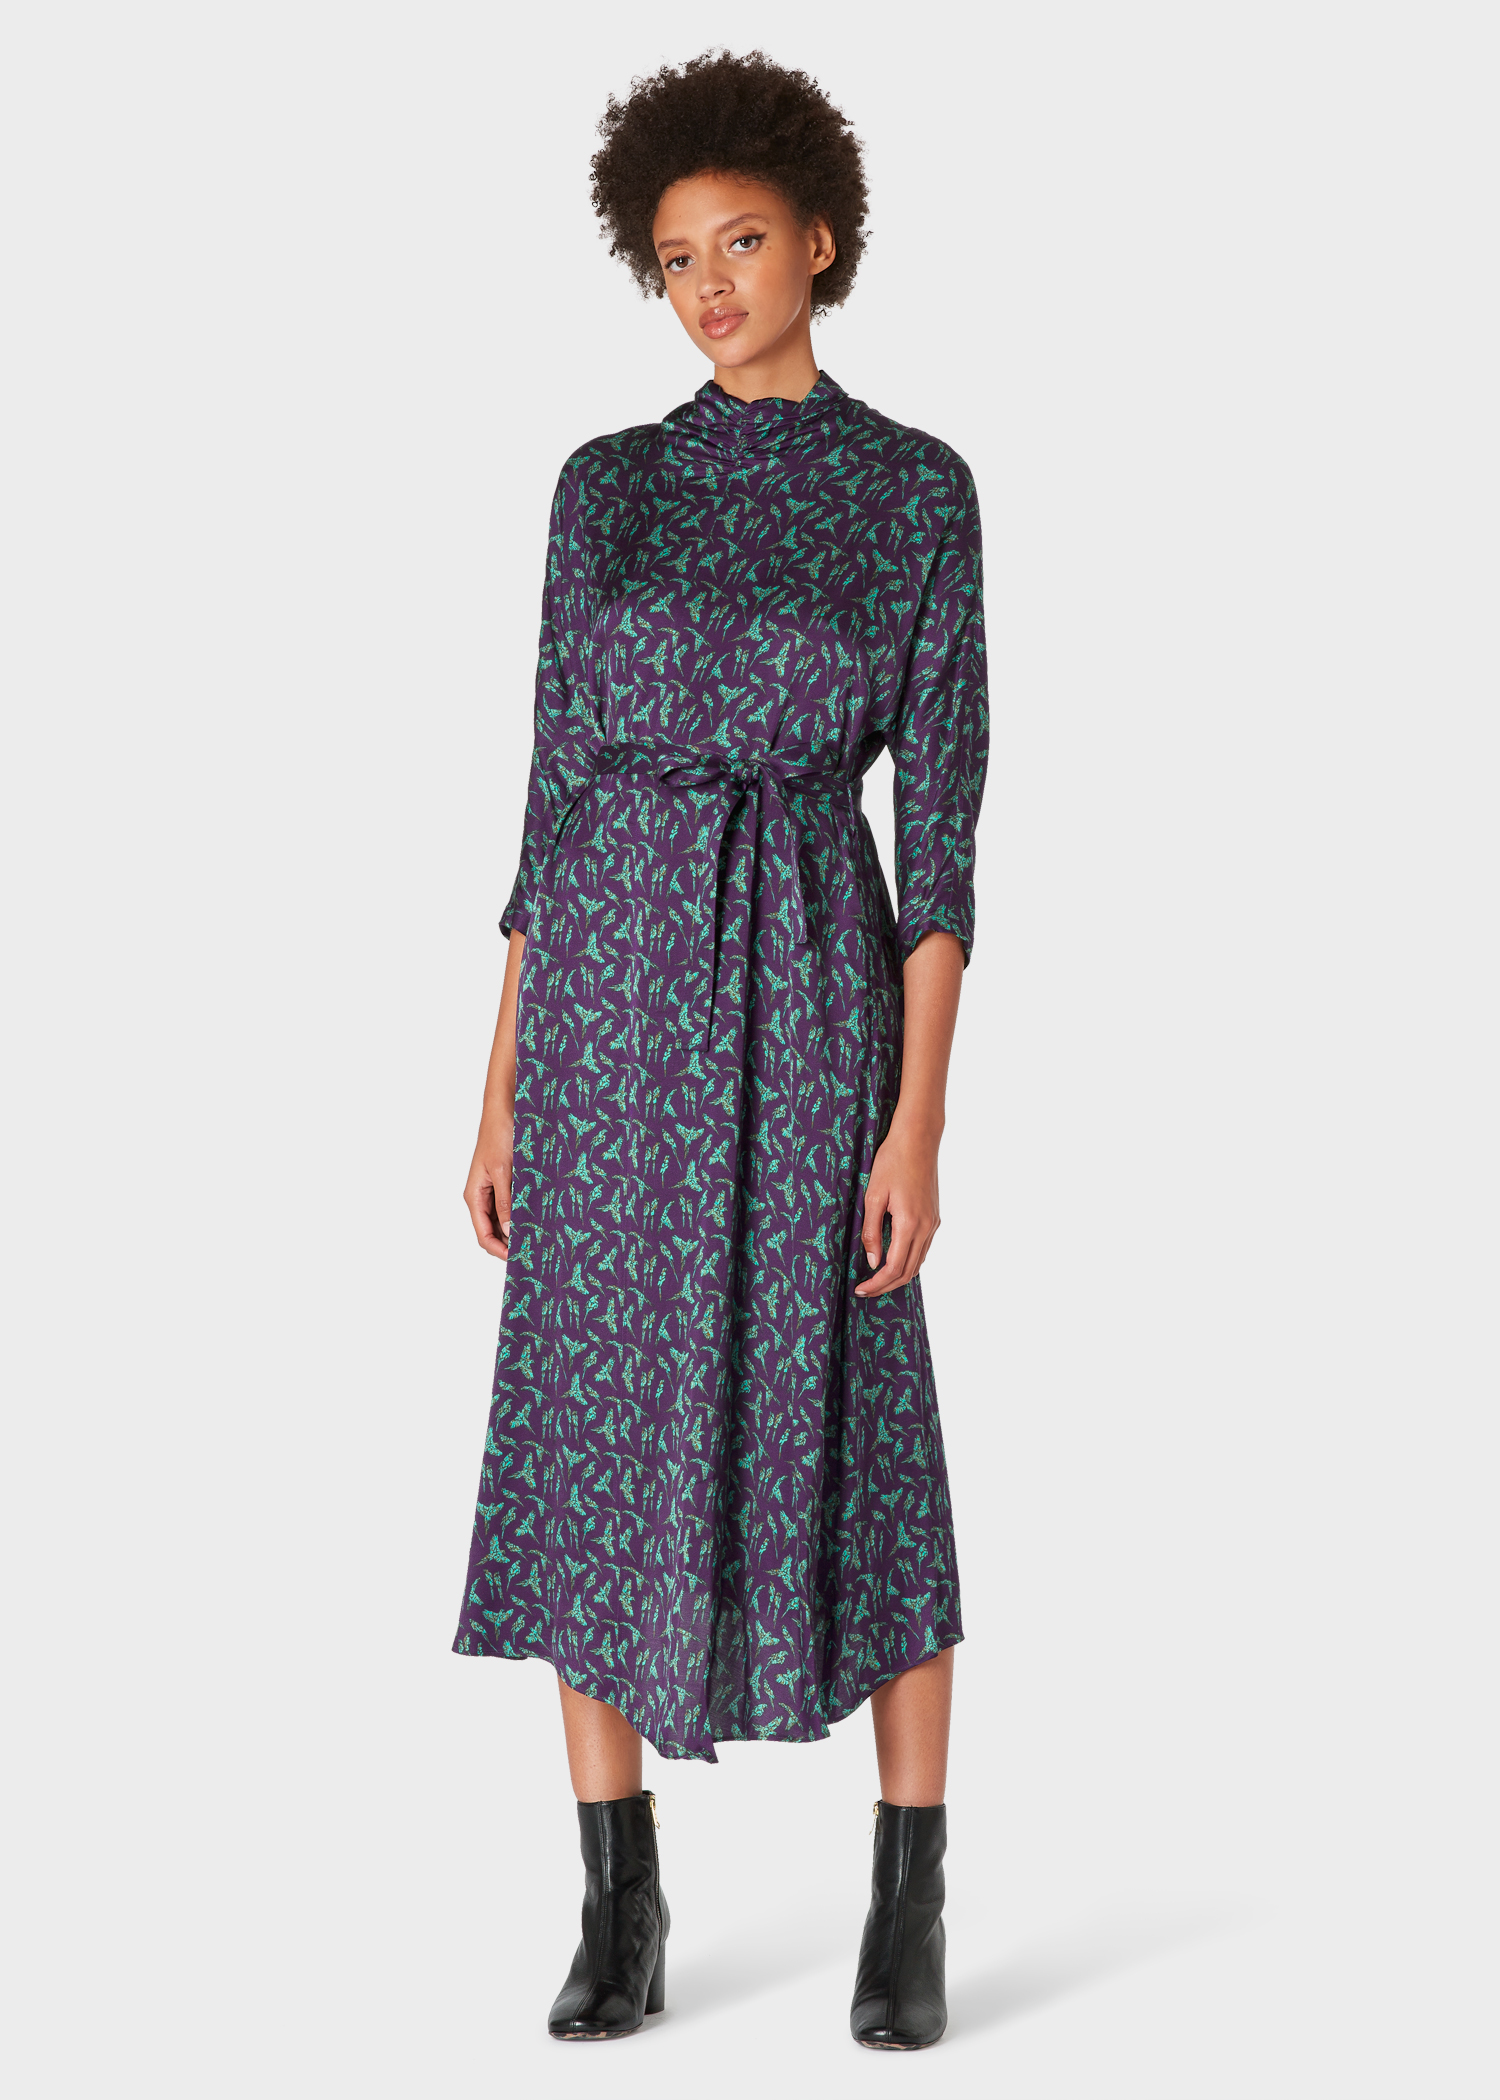 Model front view - Women's Violet 'Parrot' Print Gathered-Neck Midi Dress Paul Smith